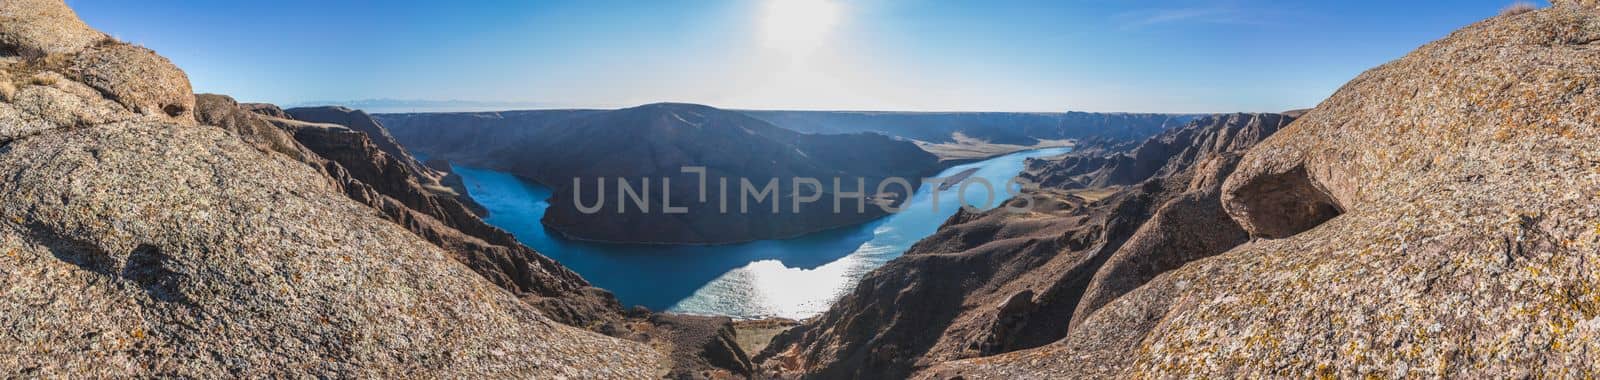 Panorama on River view in rocky gorge, Central asian nature landscape in Almaty region of Kazakhstan.